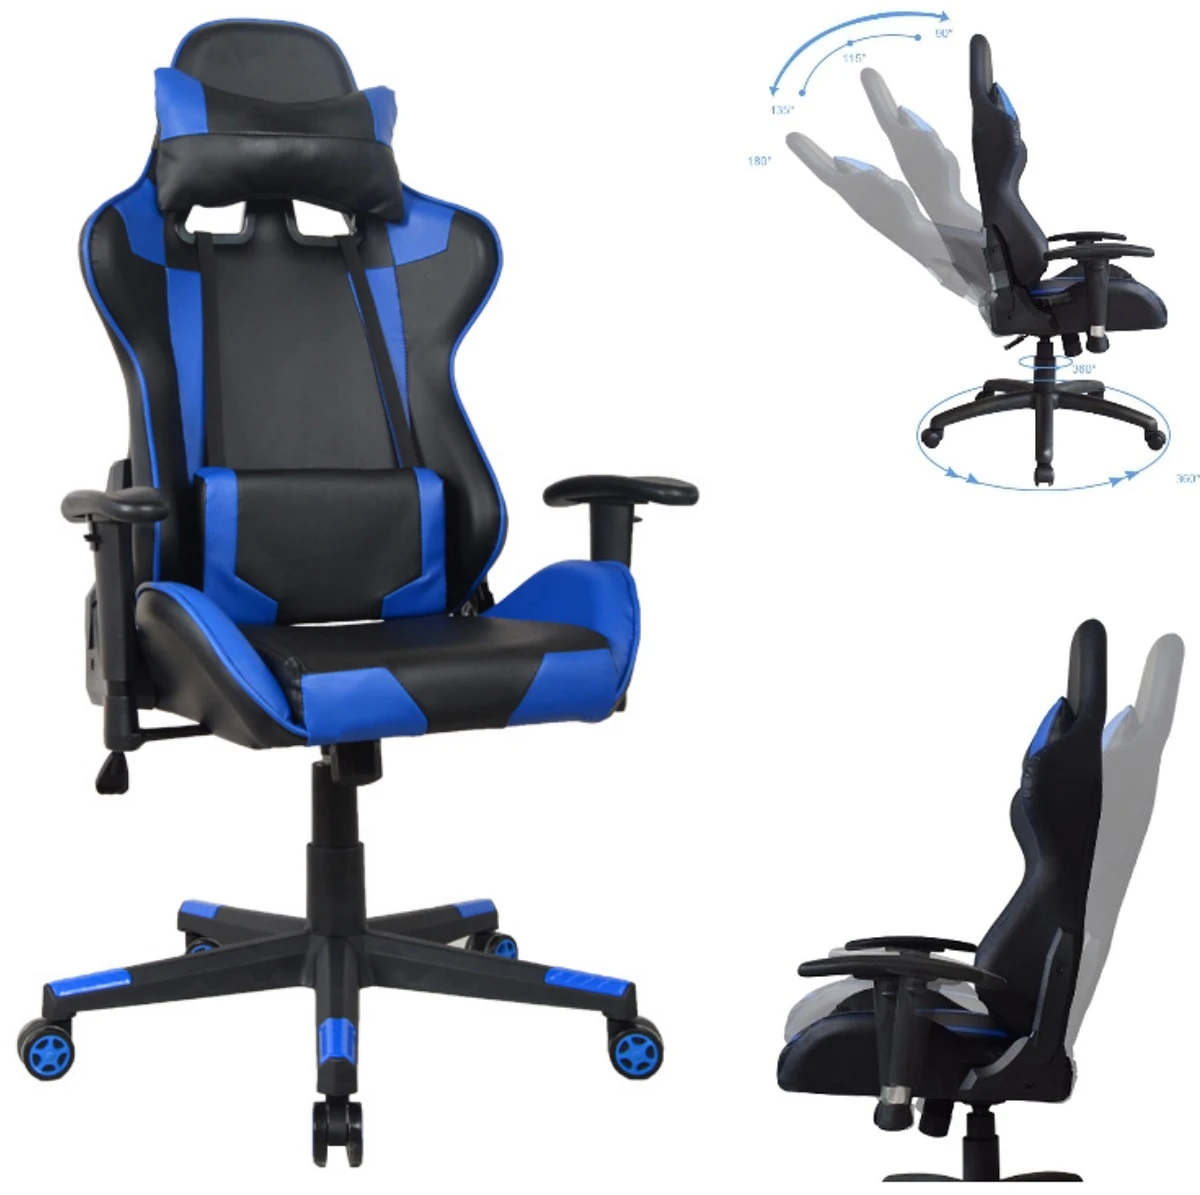 Hot Sale Custom Embroidery Logo Gaming Chair Zero Series Extreme Furniture Office Gaming Chair Buy Customize Embroidery Logo Gaming Chair Scorpion Gaming Chair Chair Gaming Computer Product On Alibaba Com